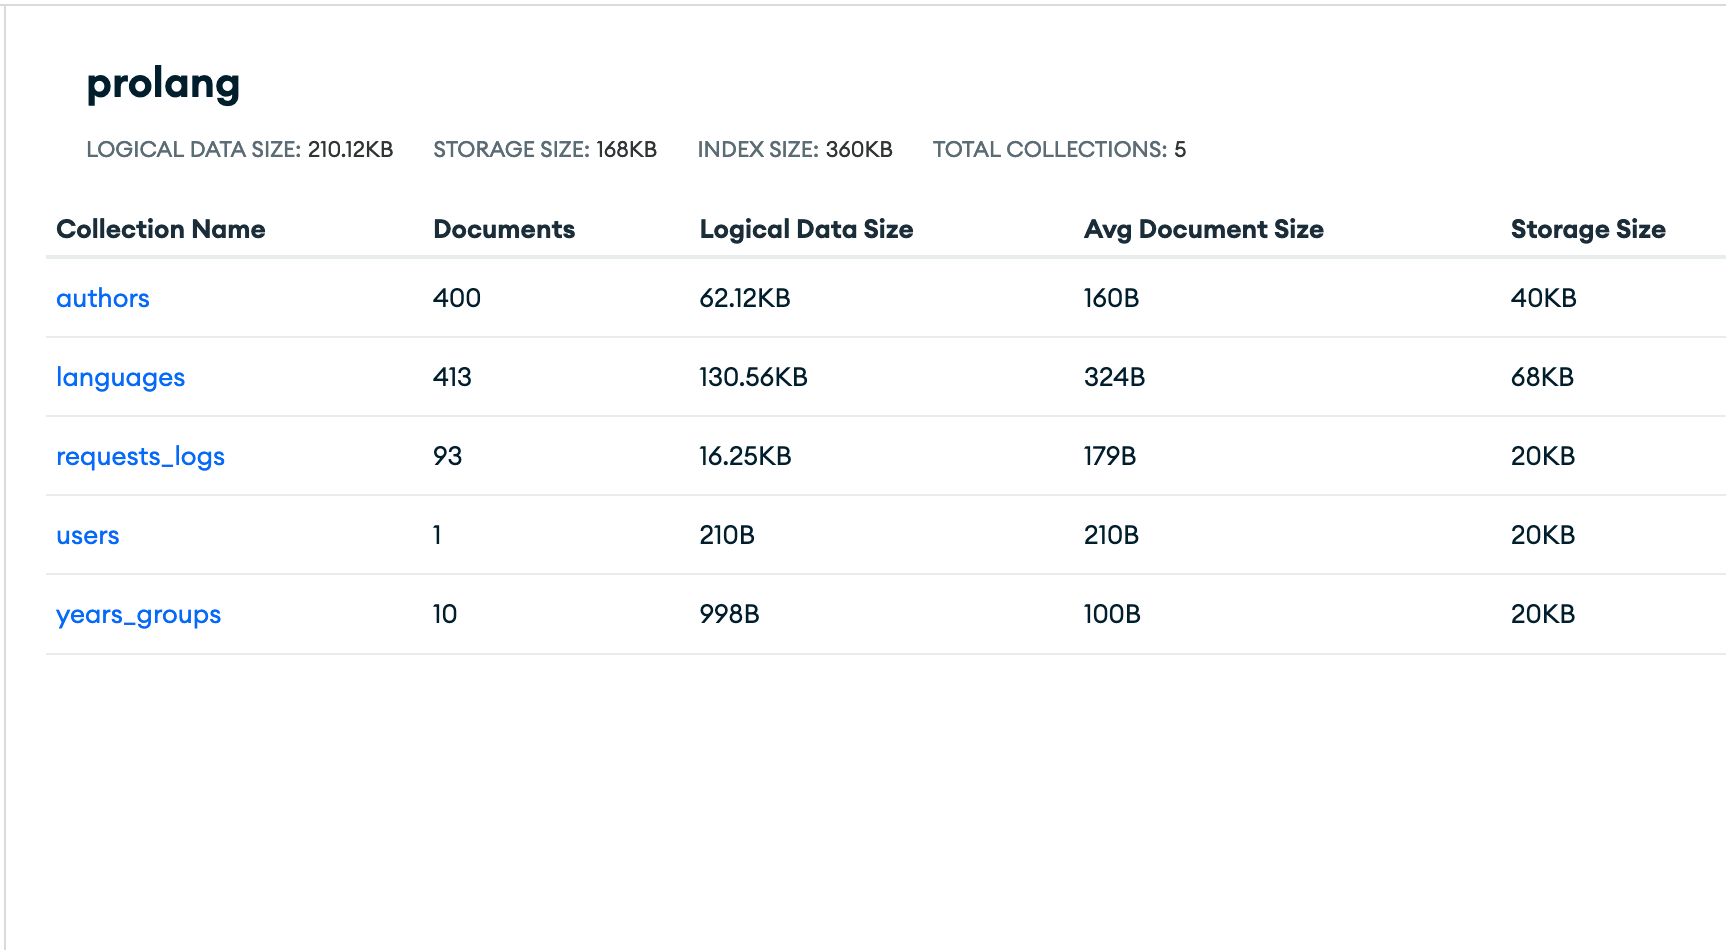 View the collections of the MongoDB database from the MongoDB Atlas console.